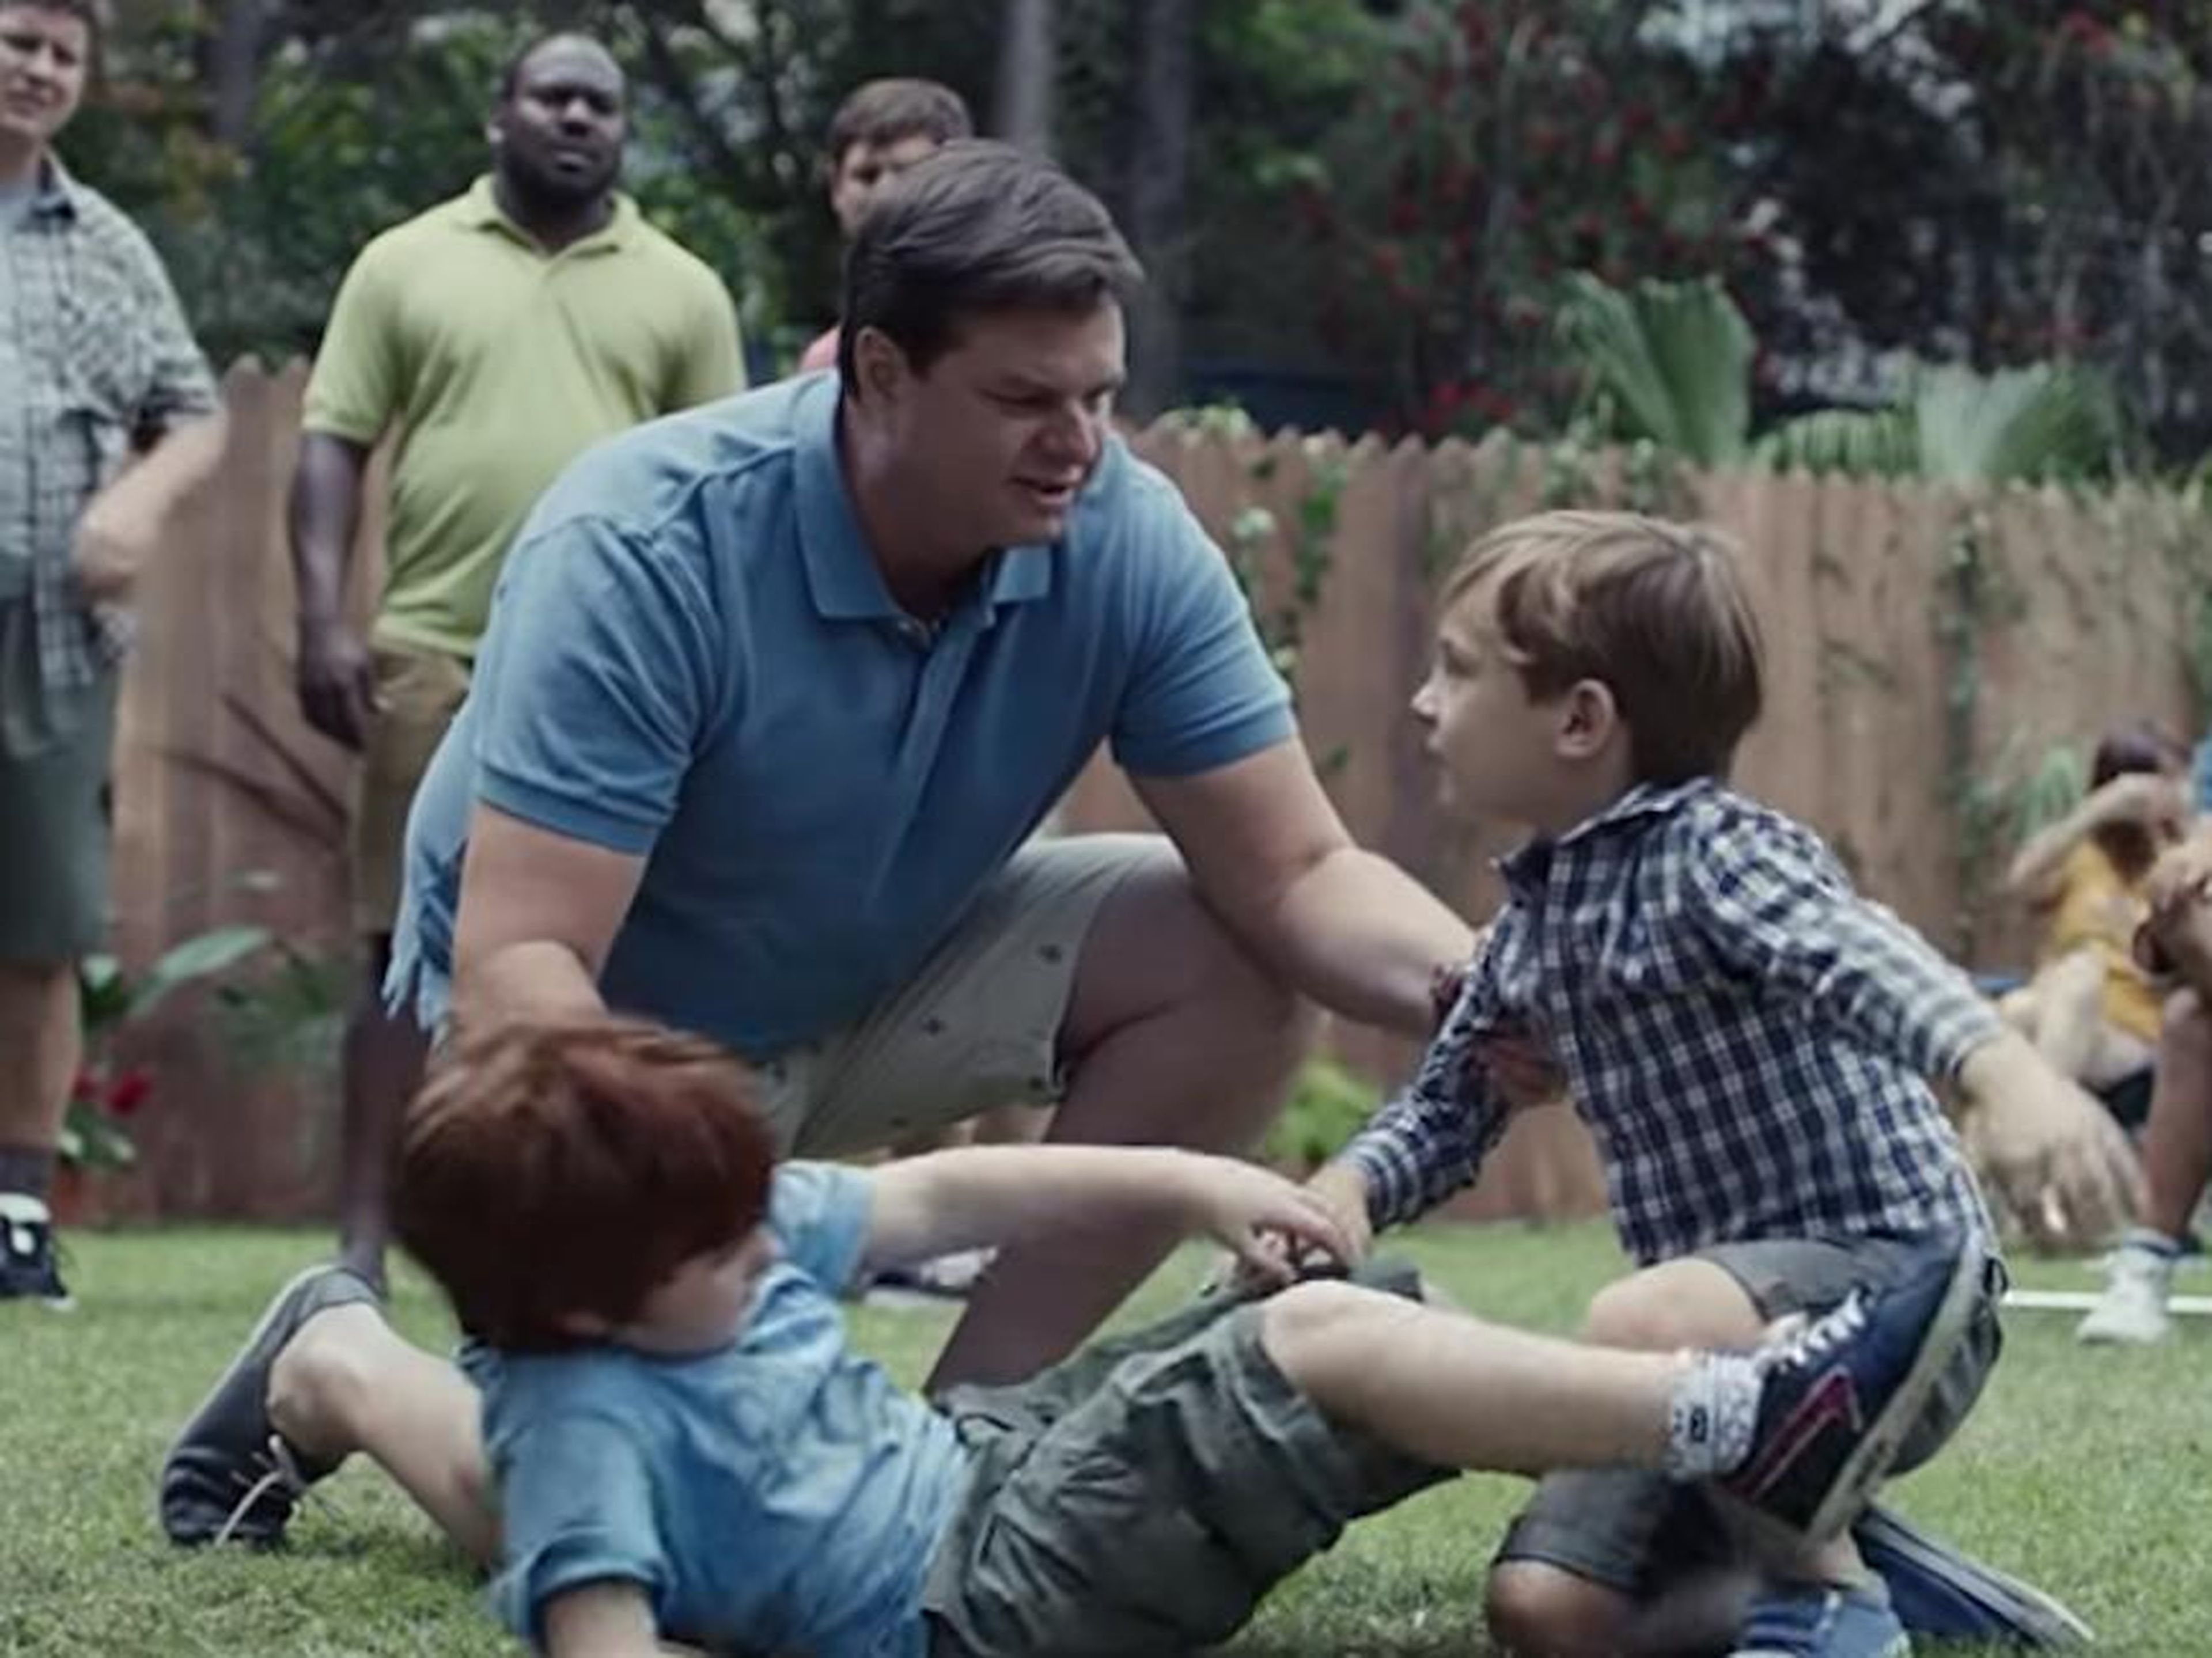 Gillette is facing a lot of backlash over its new ad.